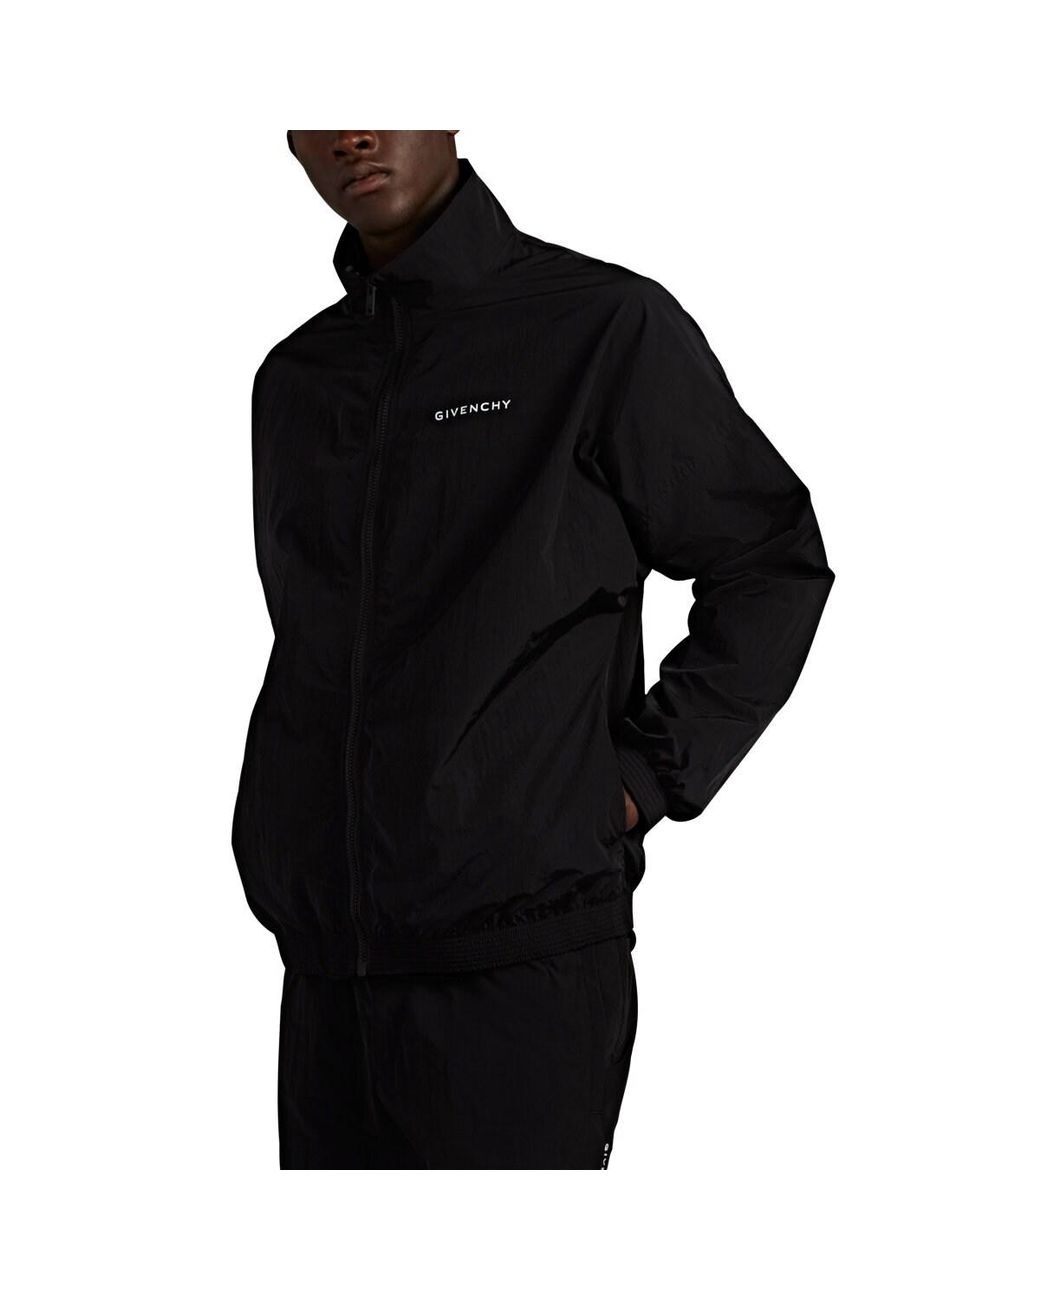 Givenchy Synthetic Logo-collar Track Jacket in Black for Men - Lyst